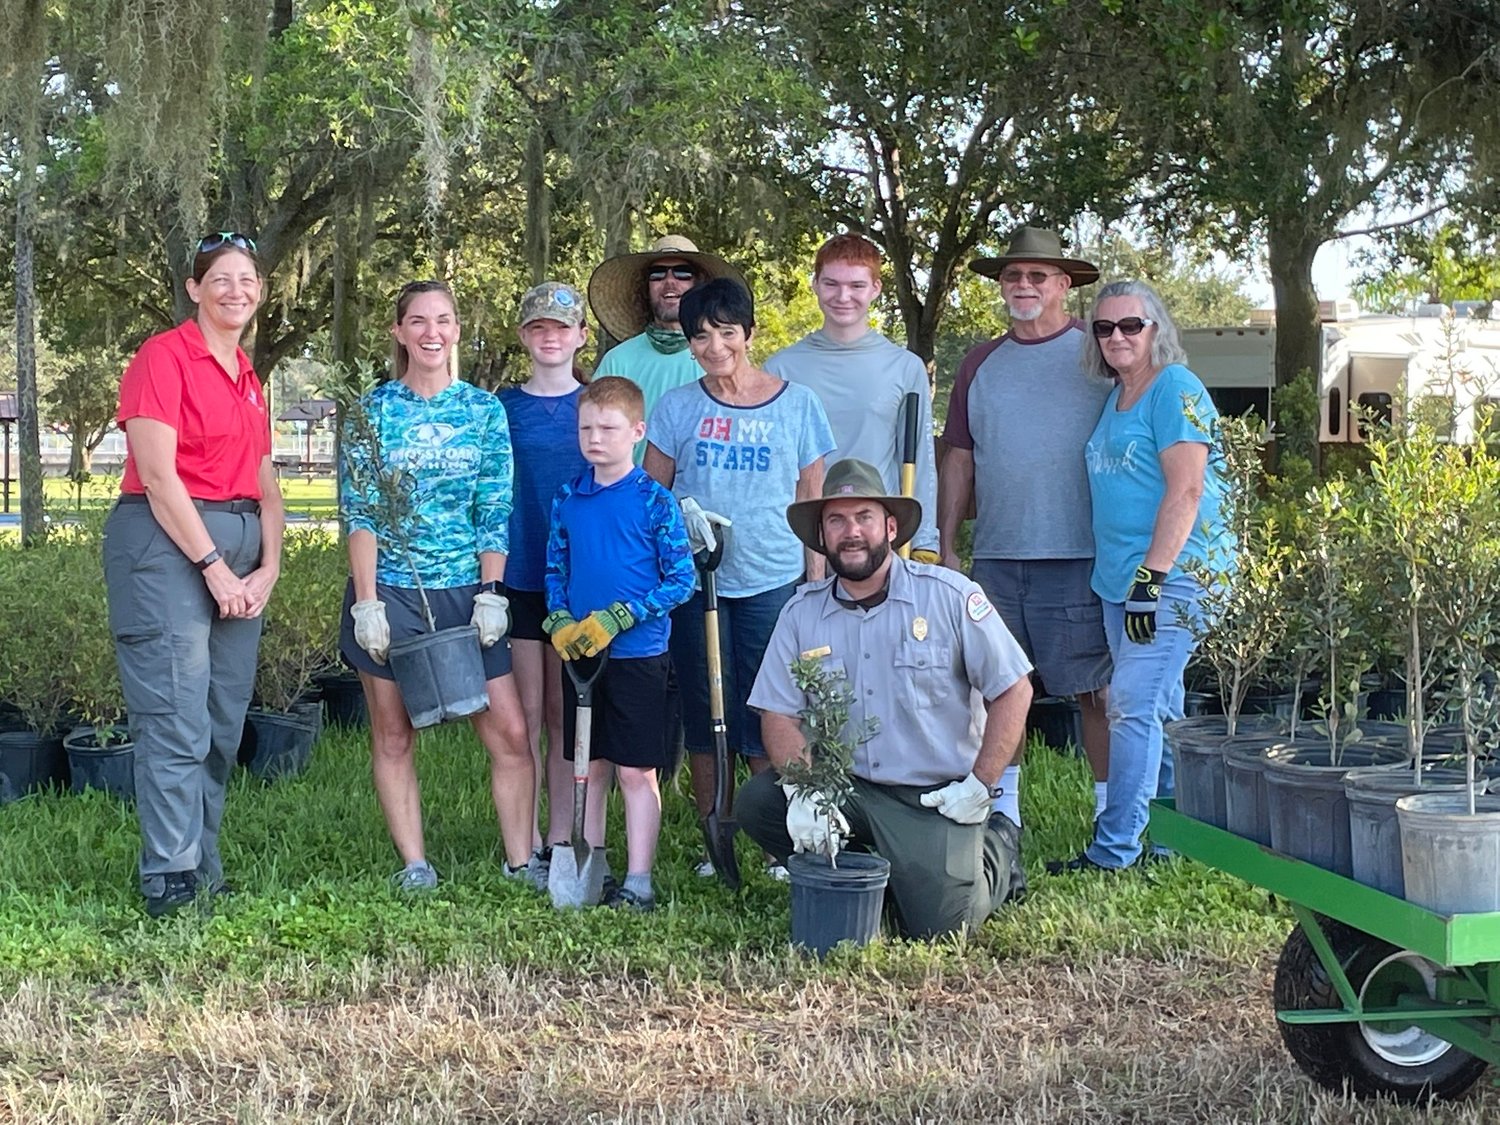 Ninety volunteers from the neighborhood, local schools and colleges, along with the support of 17 Corps rangers and staff, reforested a large grass field with native plants  Sept 24 at the W.P. Franklin Lock Recreation Area.